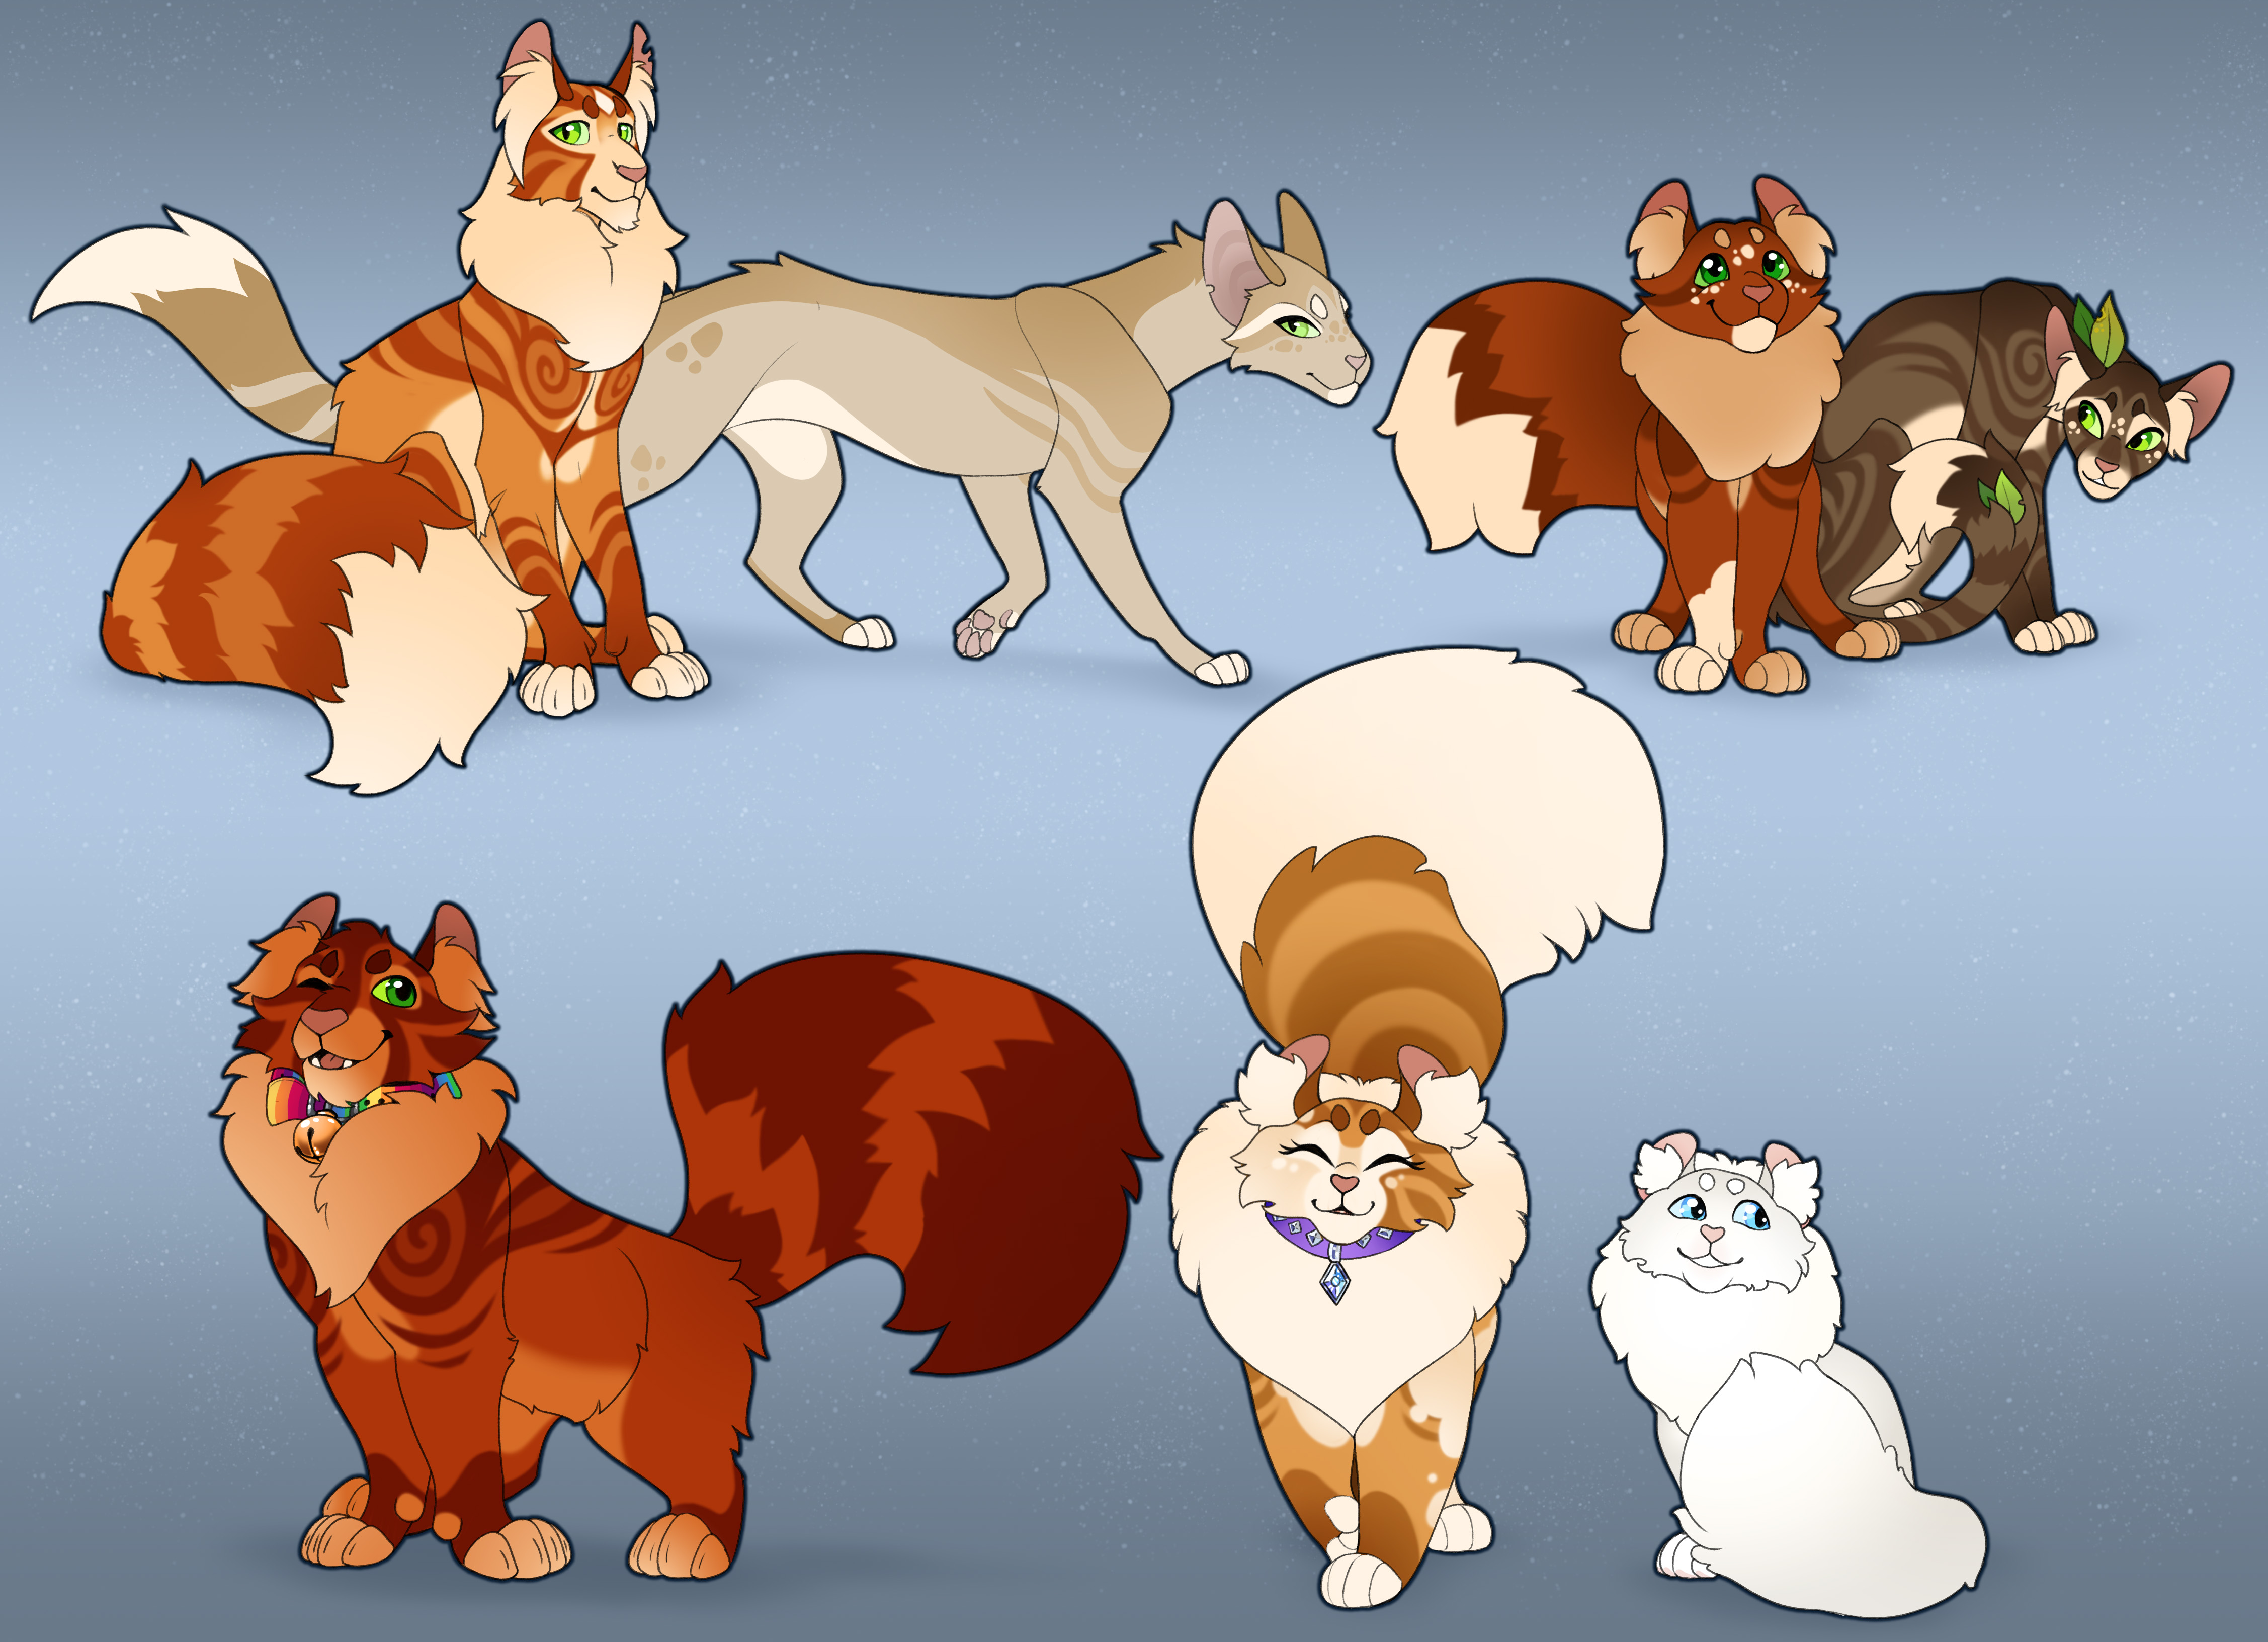 Genetically Accurate Warrior Cats #1 - Firestar's Family 